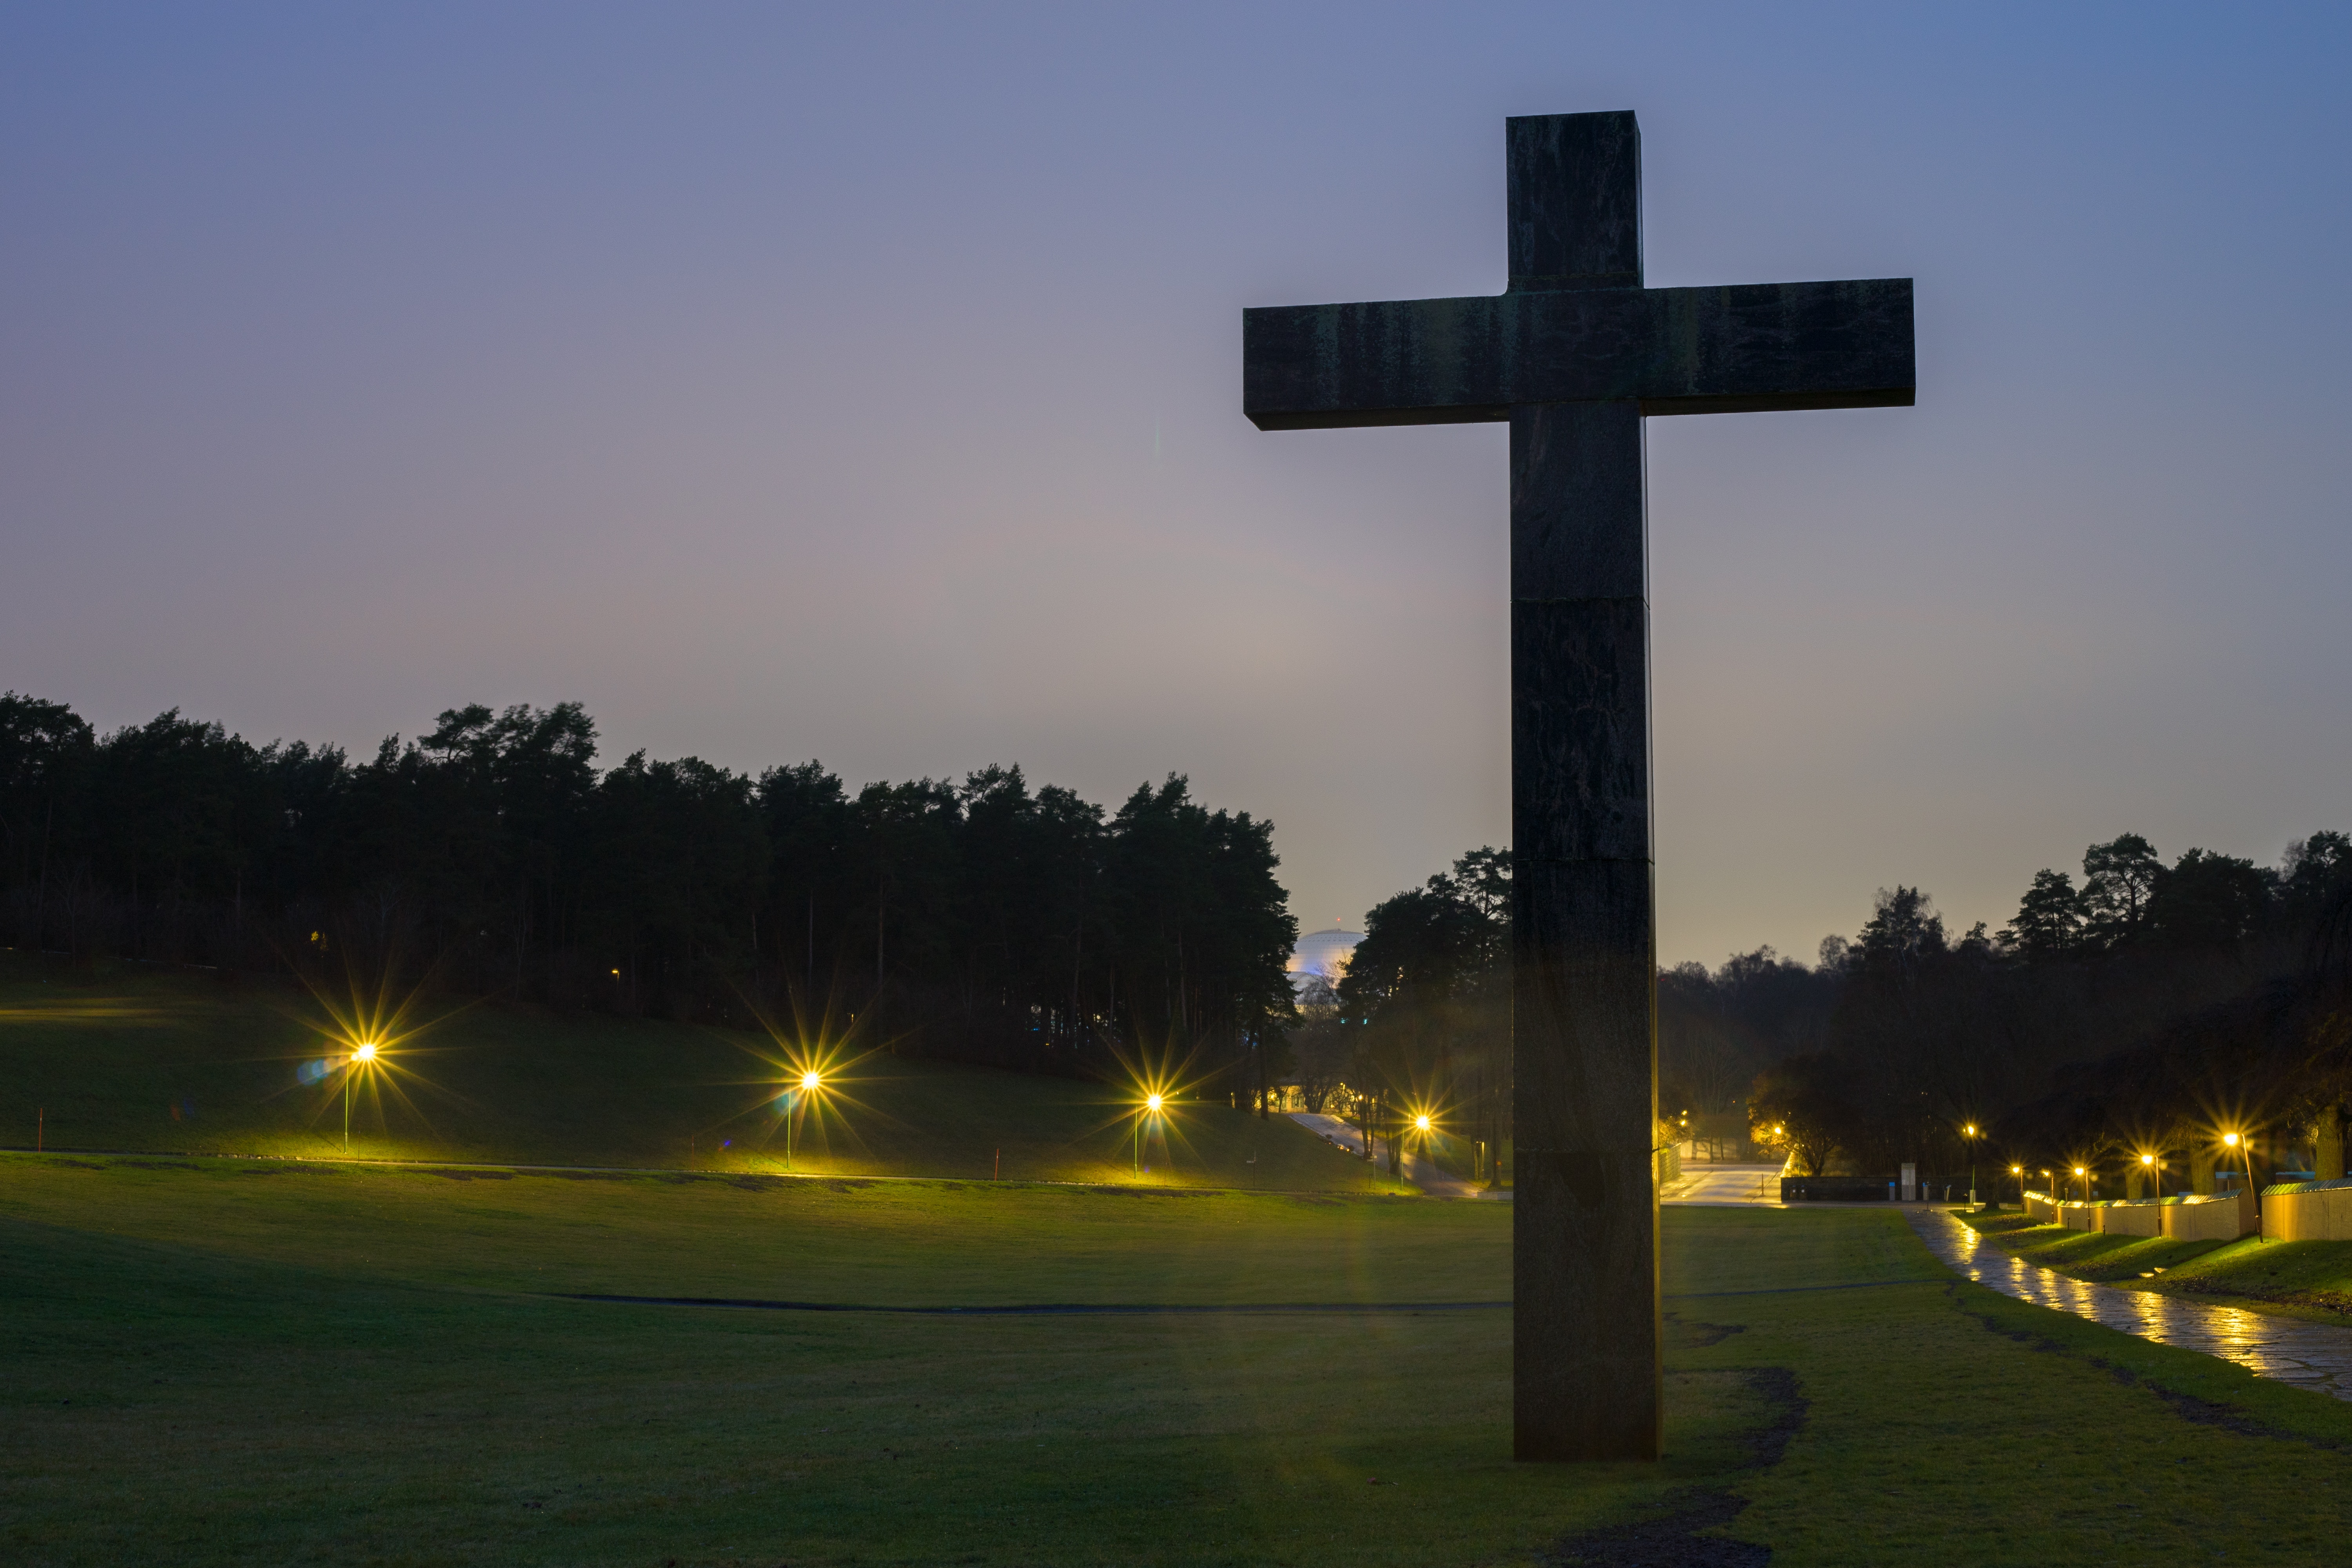 Brown cross statue on green grass field with turned on light during nighttime photo